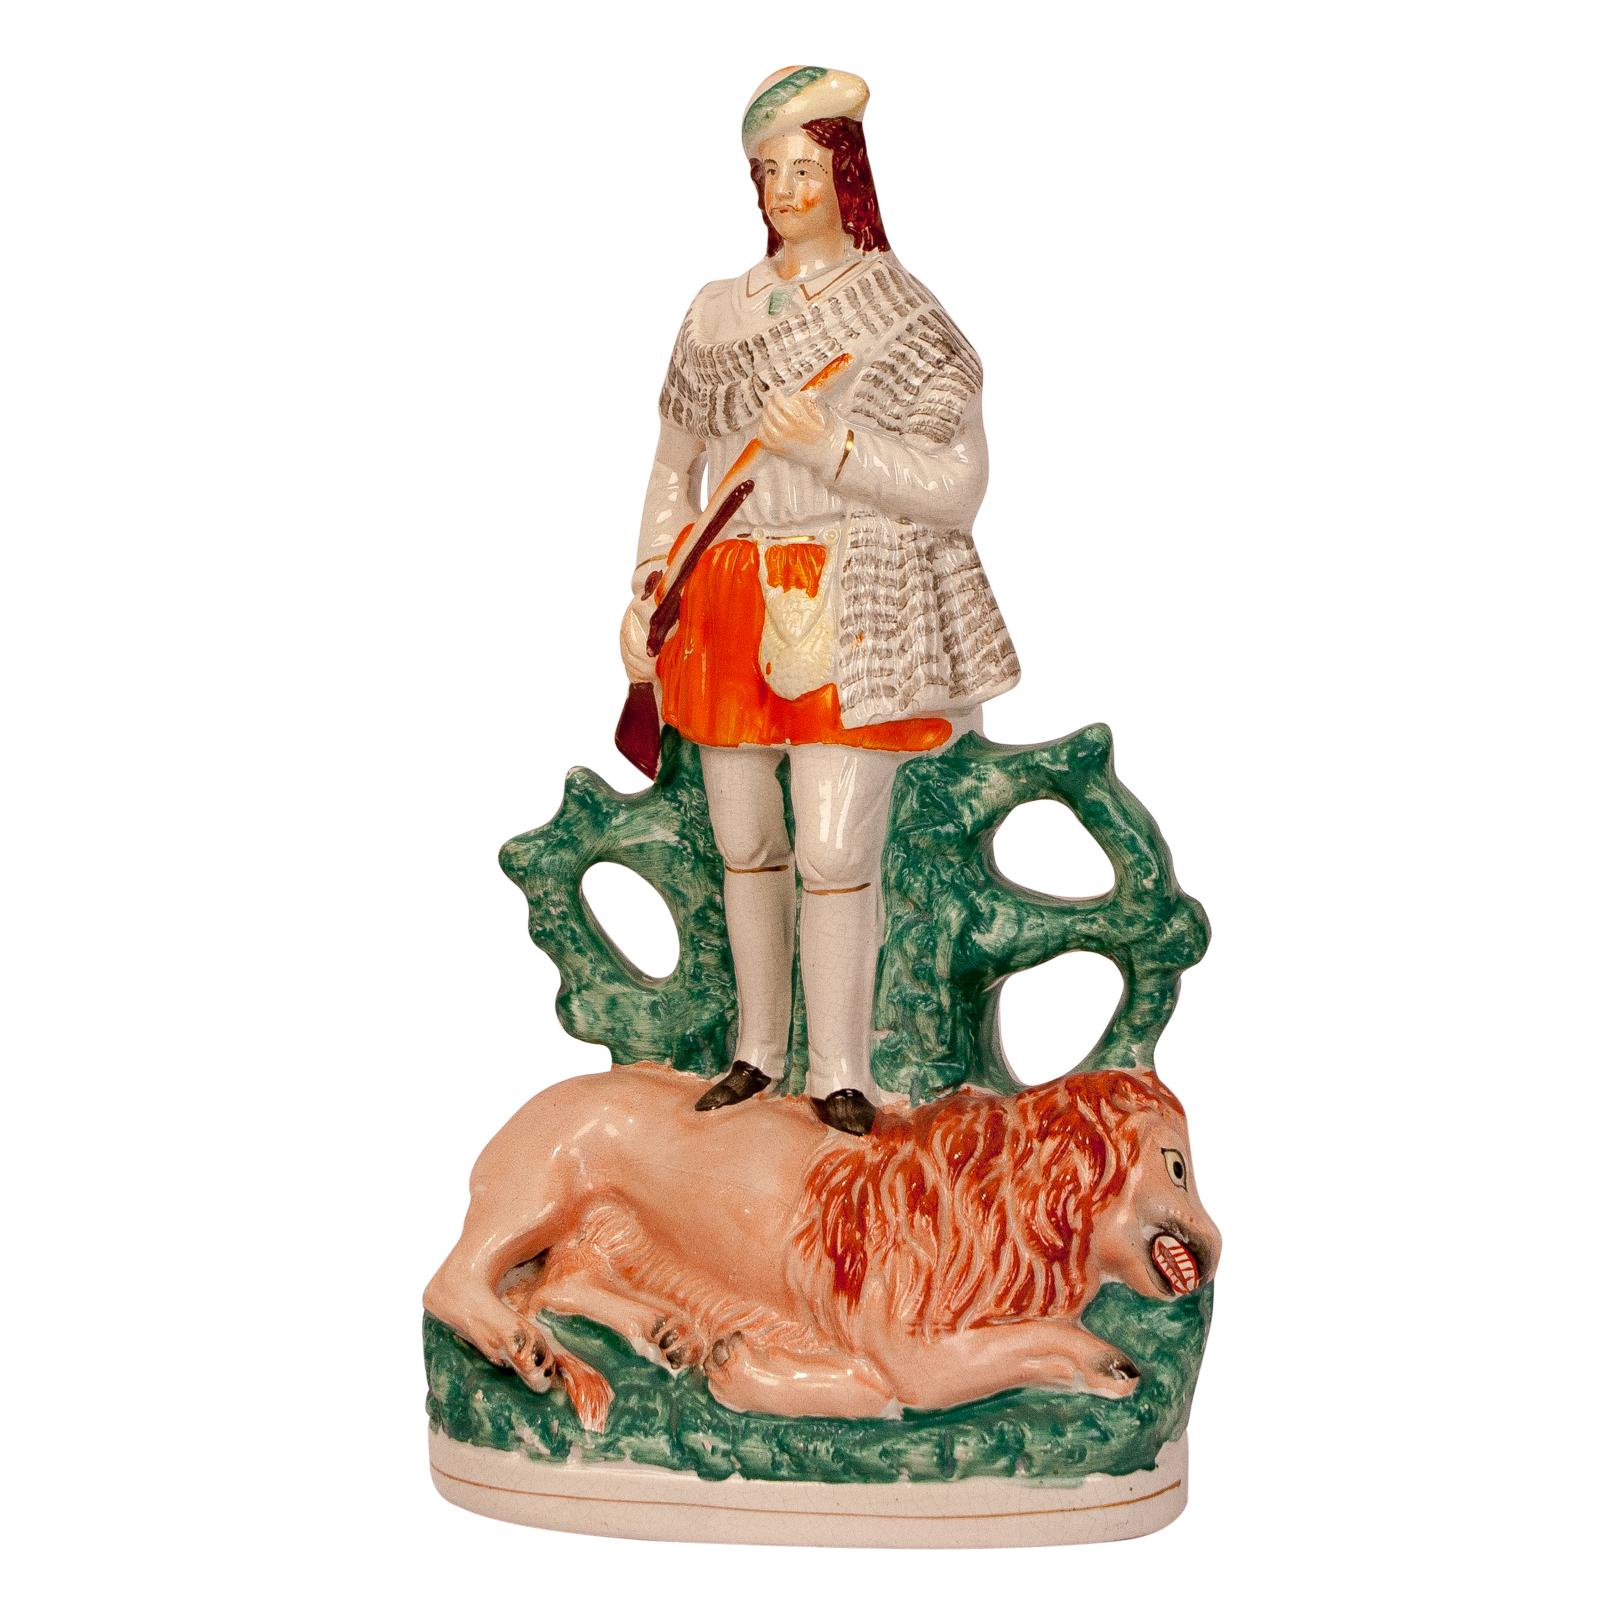 A large-scale English Staffordshire figure of a Scotch Hunter standing atop a lion, circa 1860.